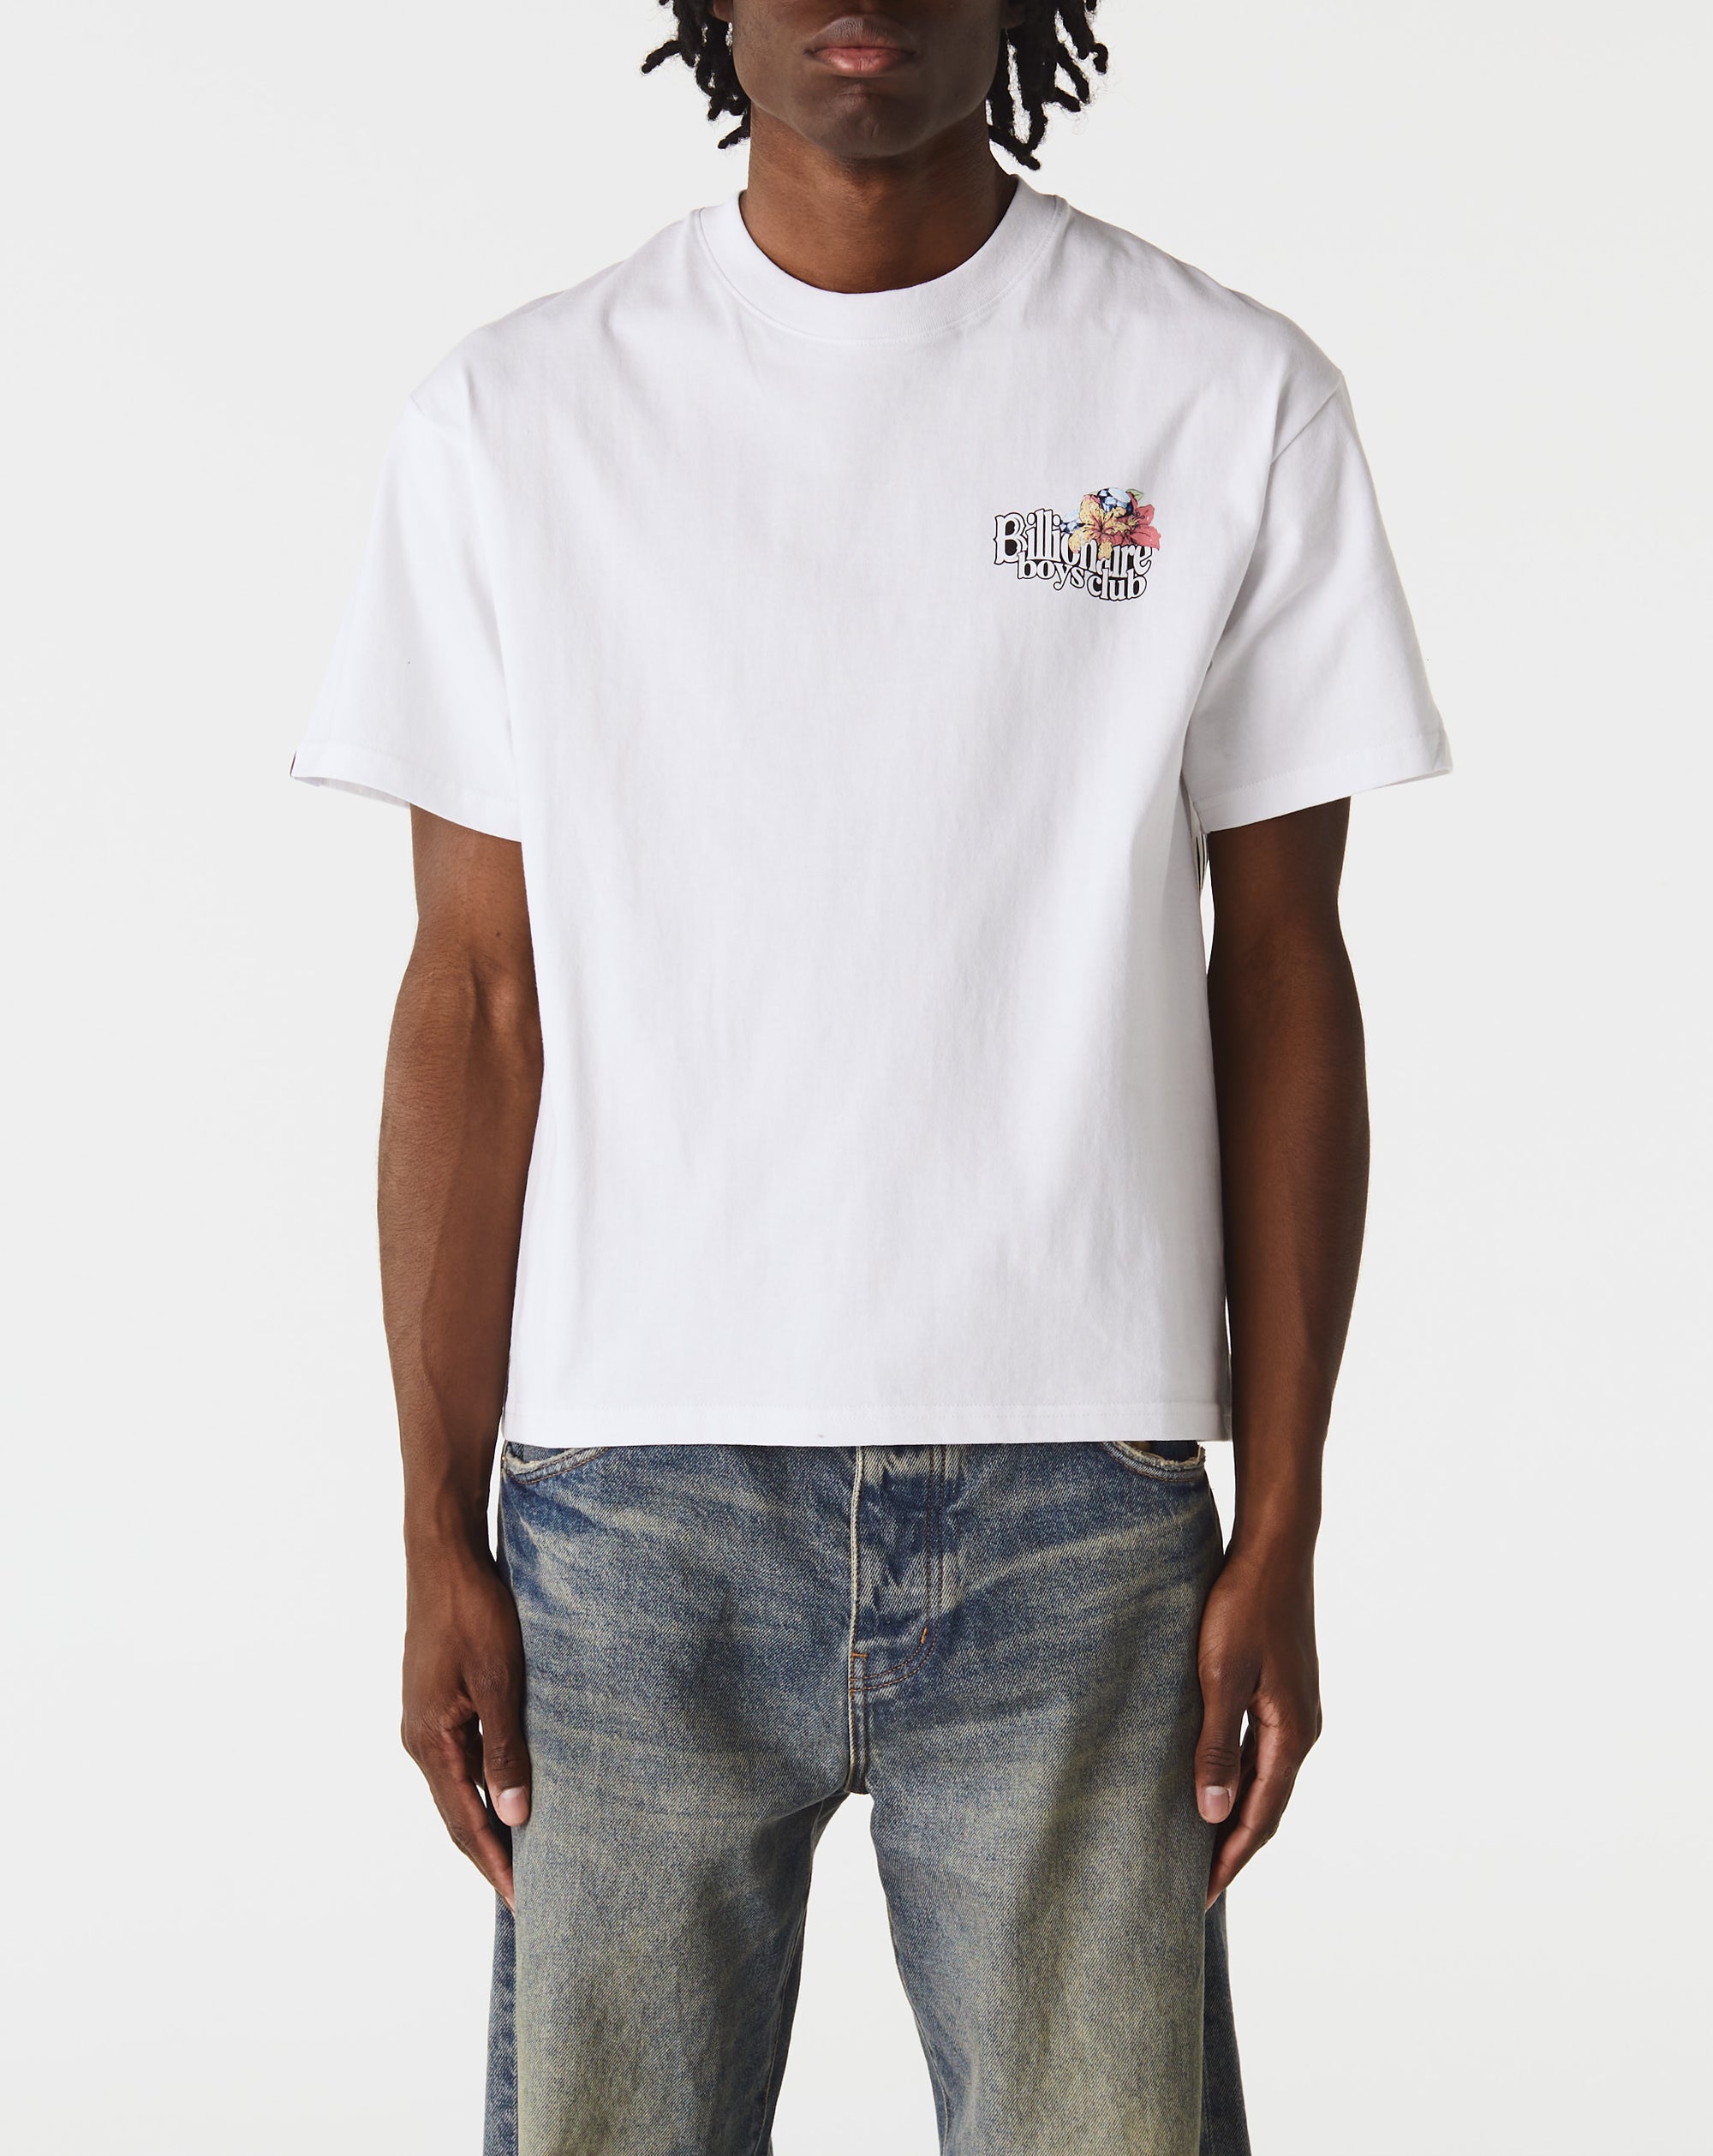 Billionaire Boys Club BB Tropical Energy T-Shirt (Cropped Fit) - Rule of Next Apparel